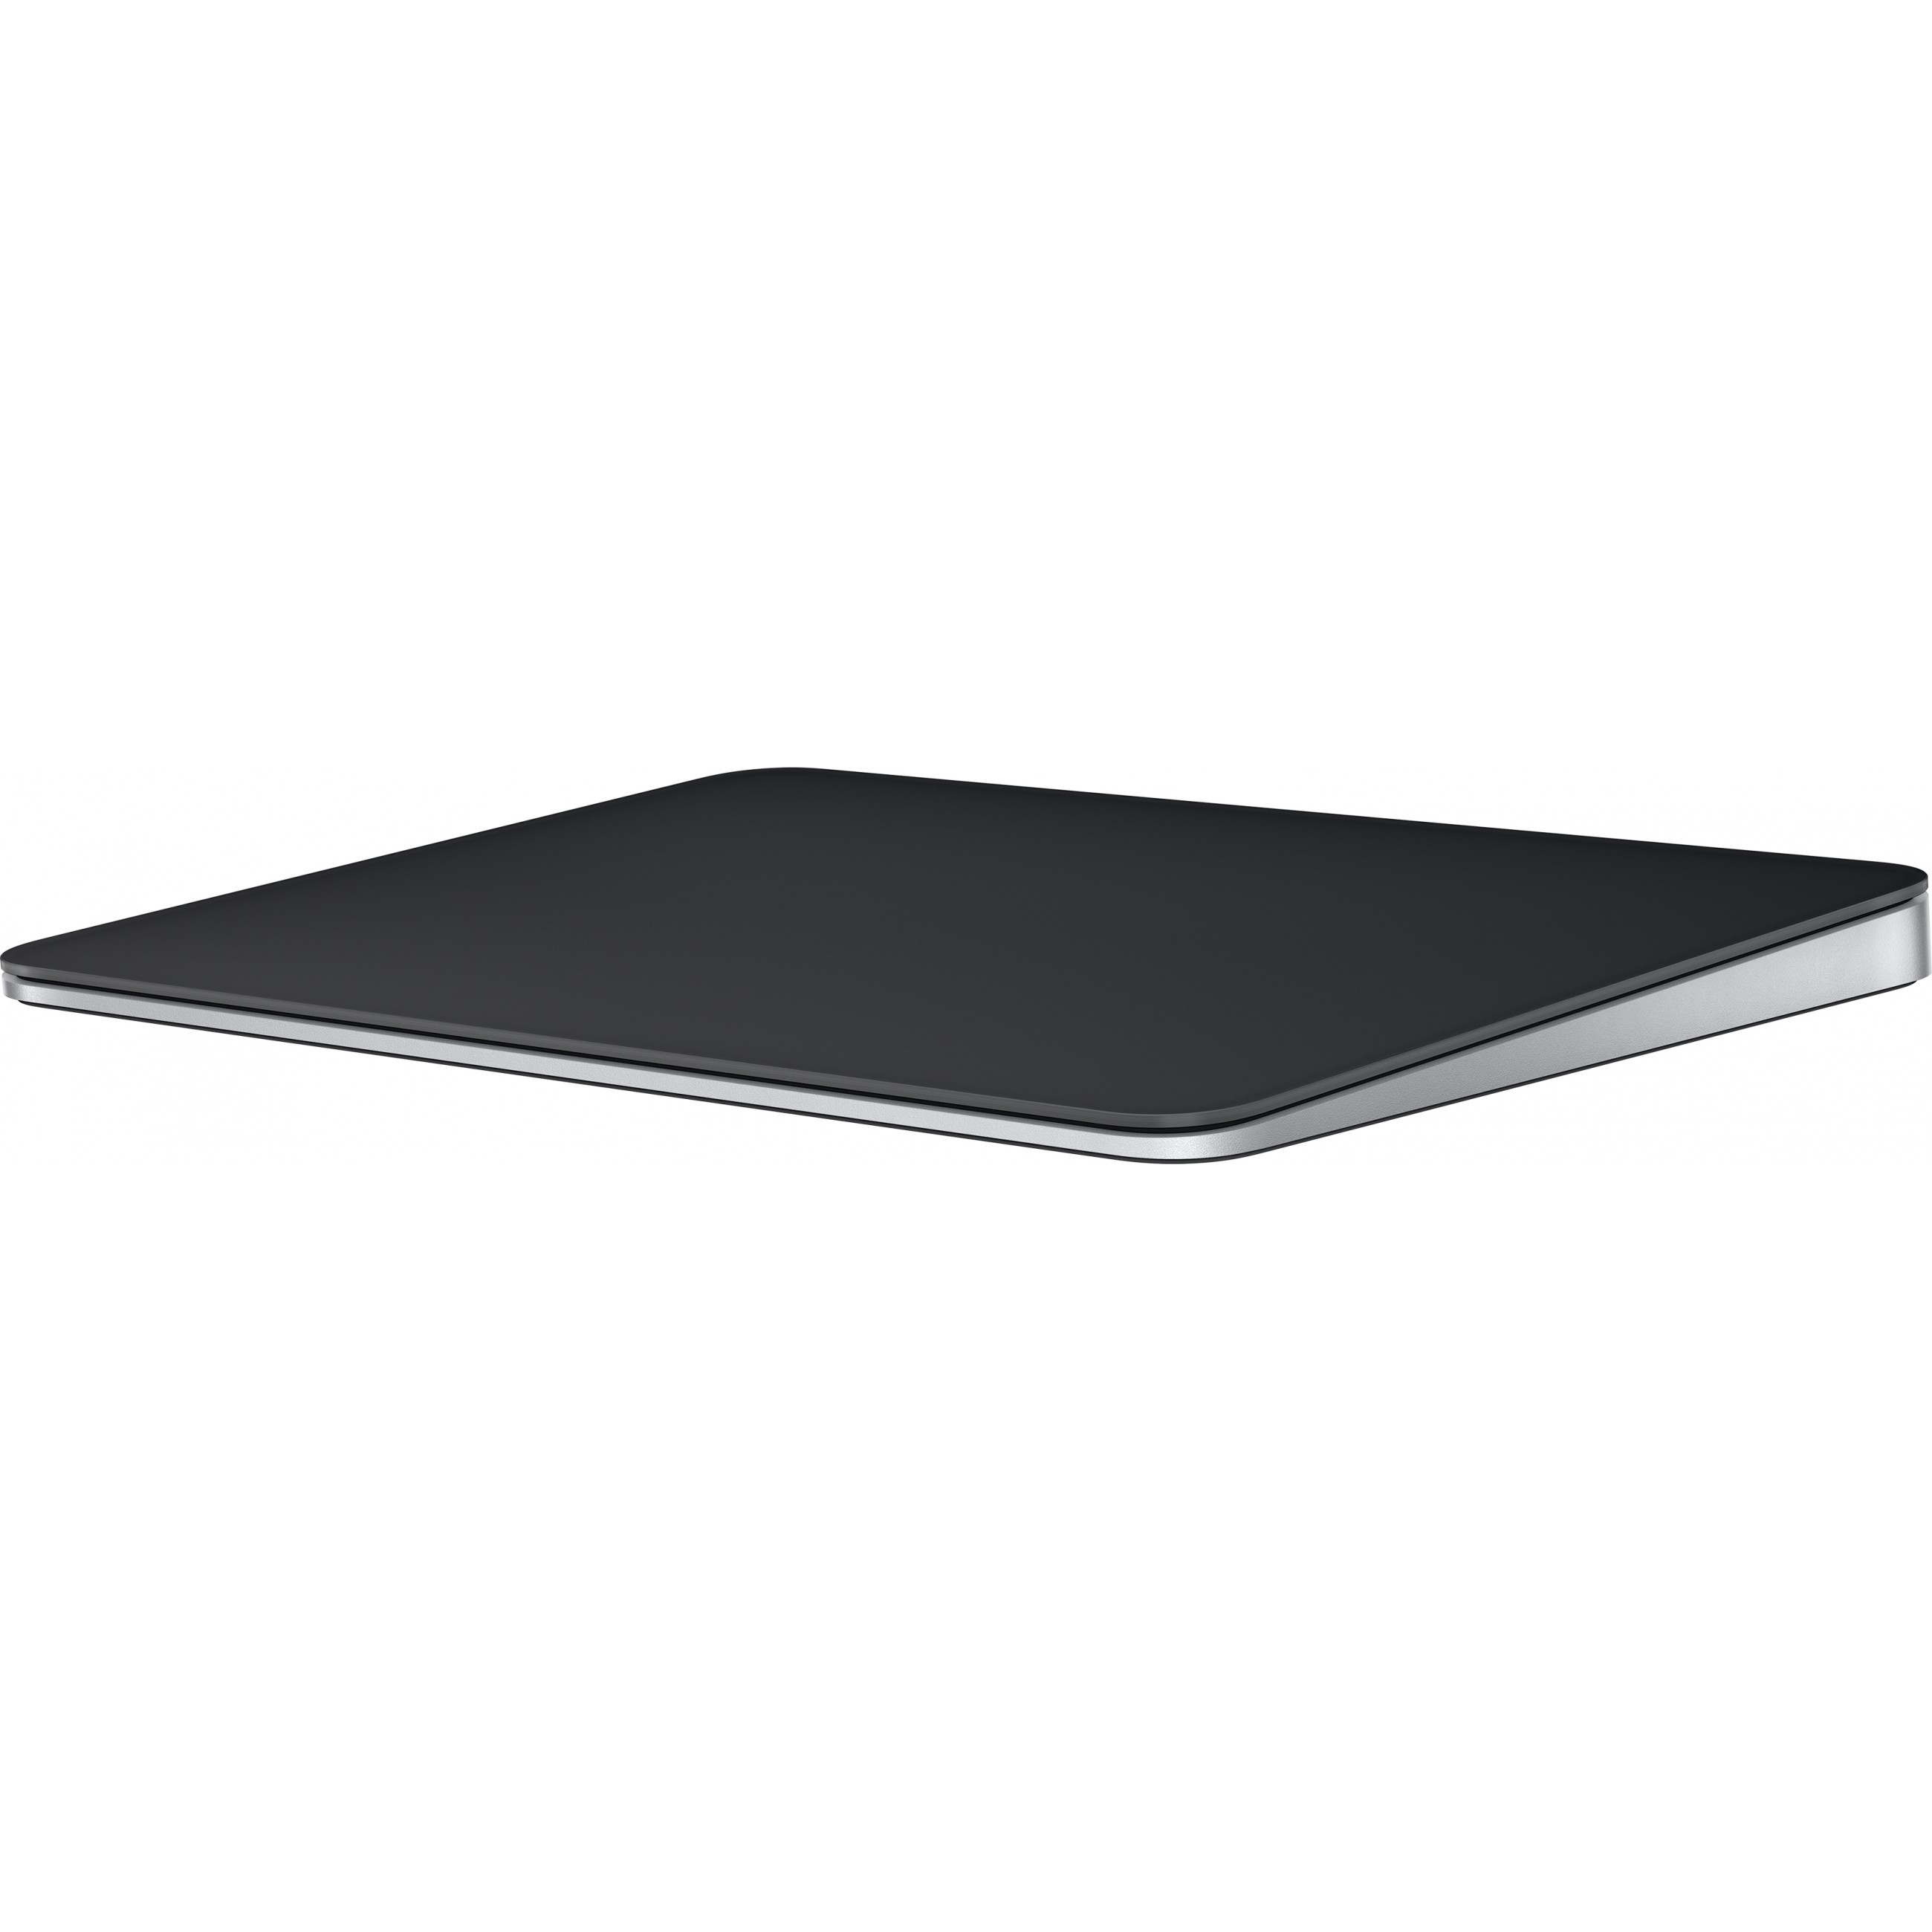 Apple Magic Trackpad touch pad